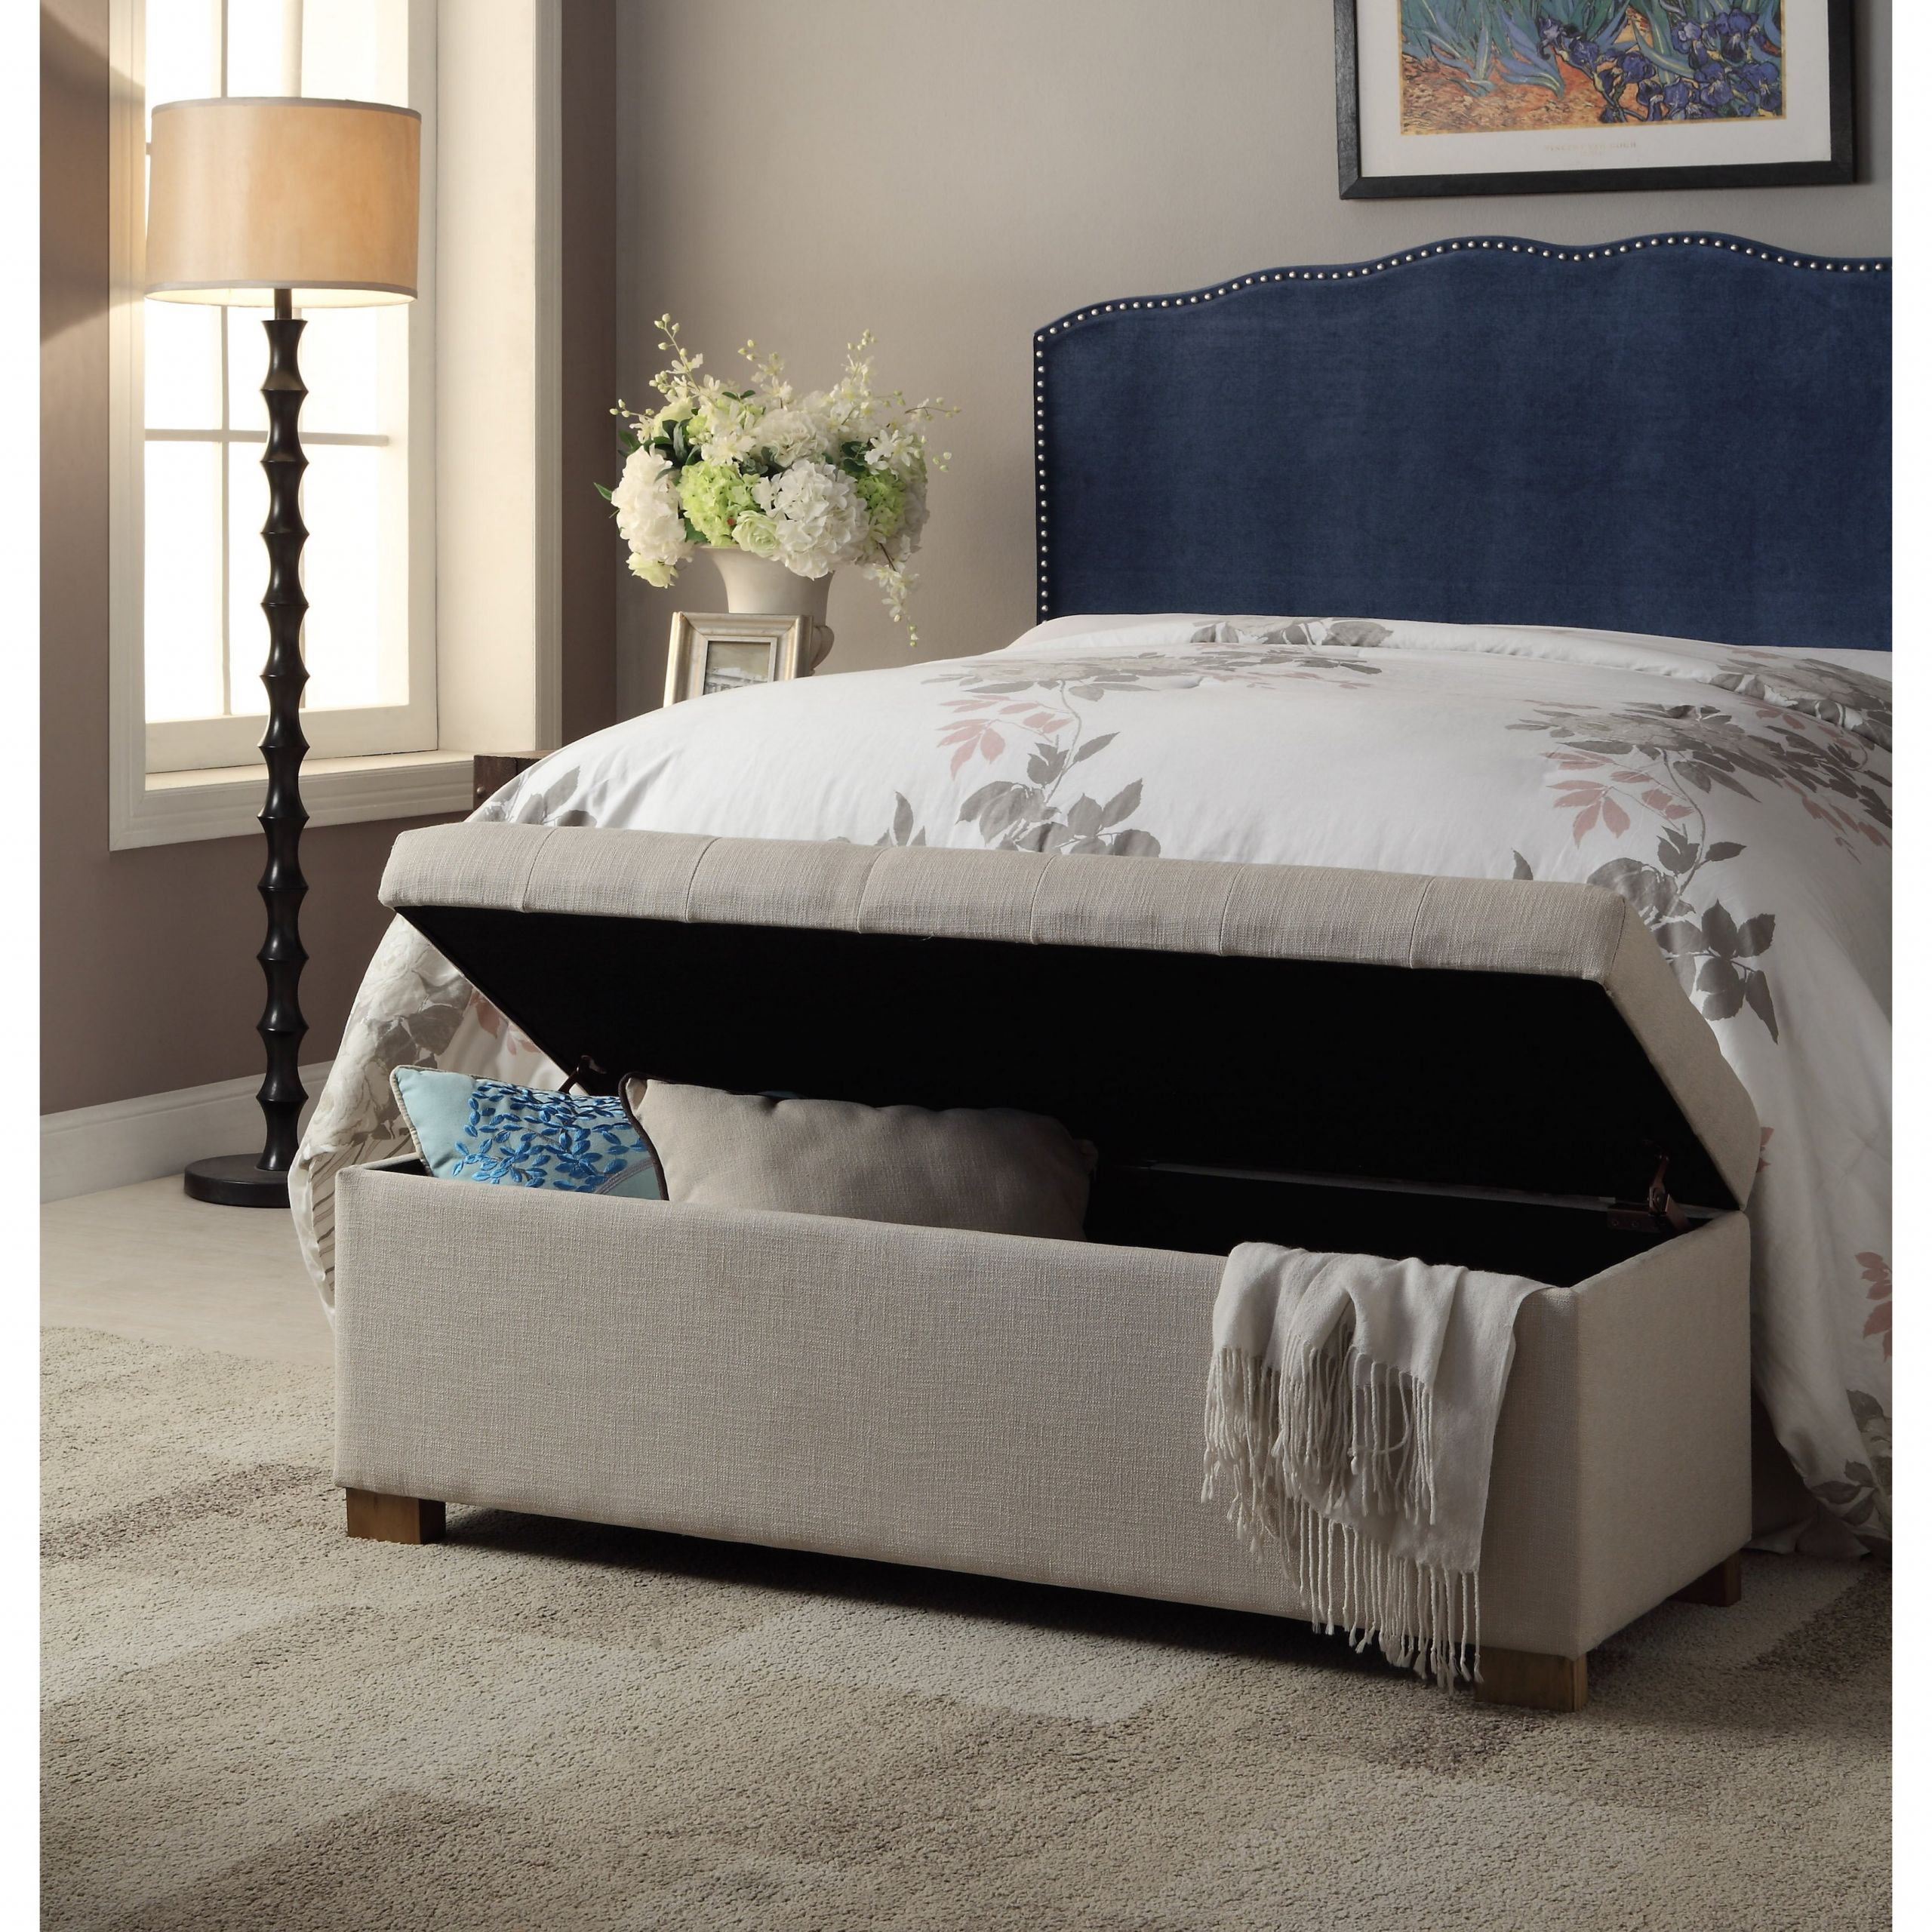 The Role Of A Bedroom Storage Bench In Interior Design